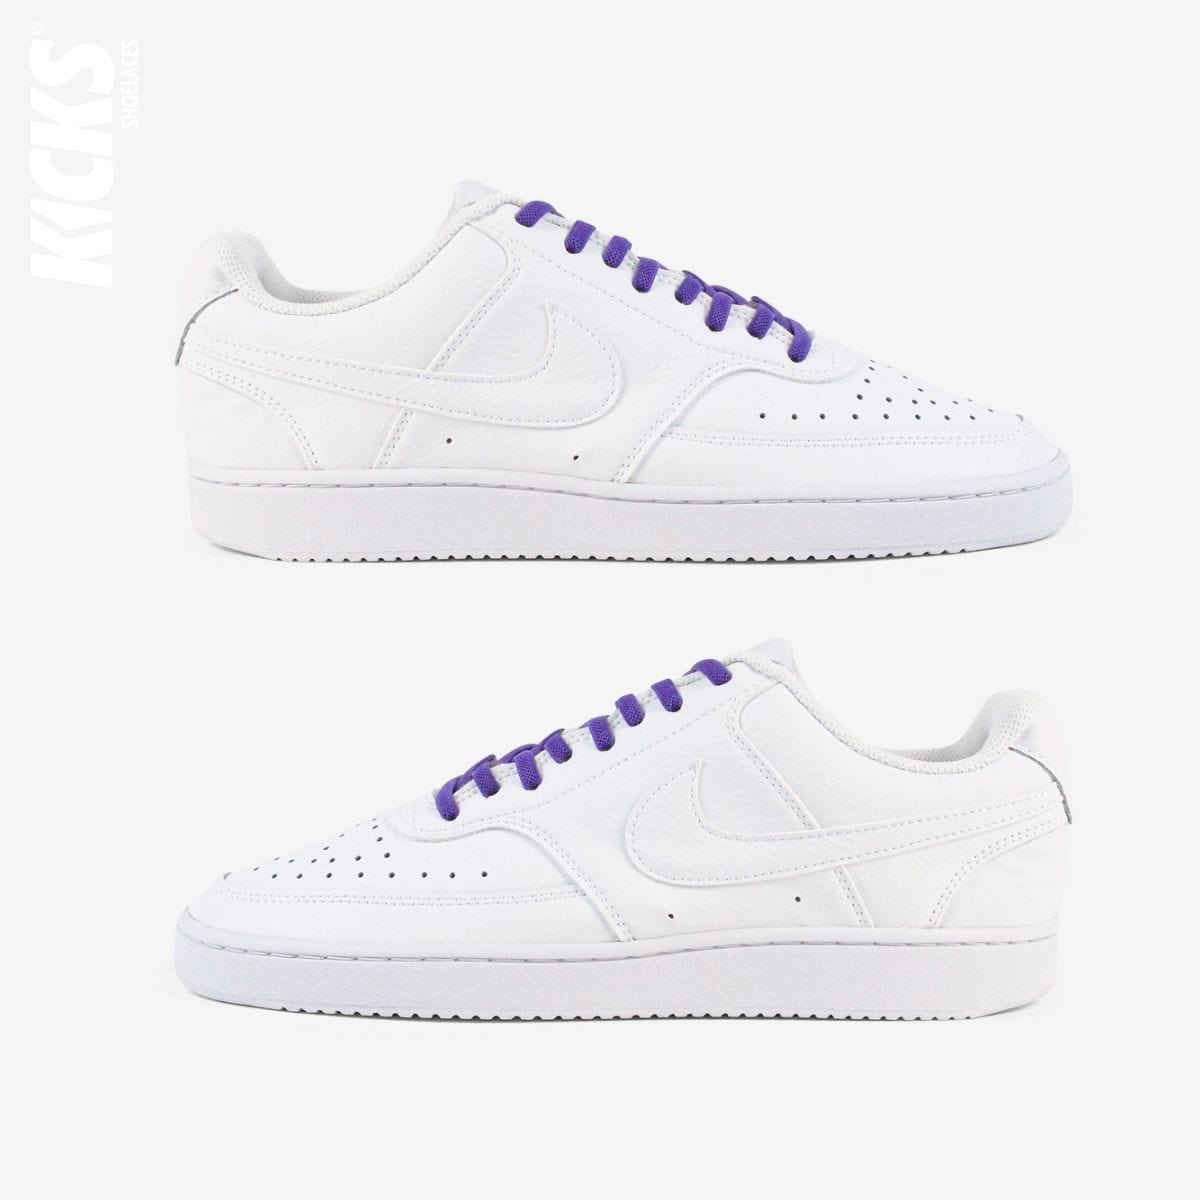 tieless-shoelaces-with-purple-laces-on-nike-white-sneakers-by-kicks-shoelaces